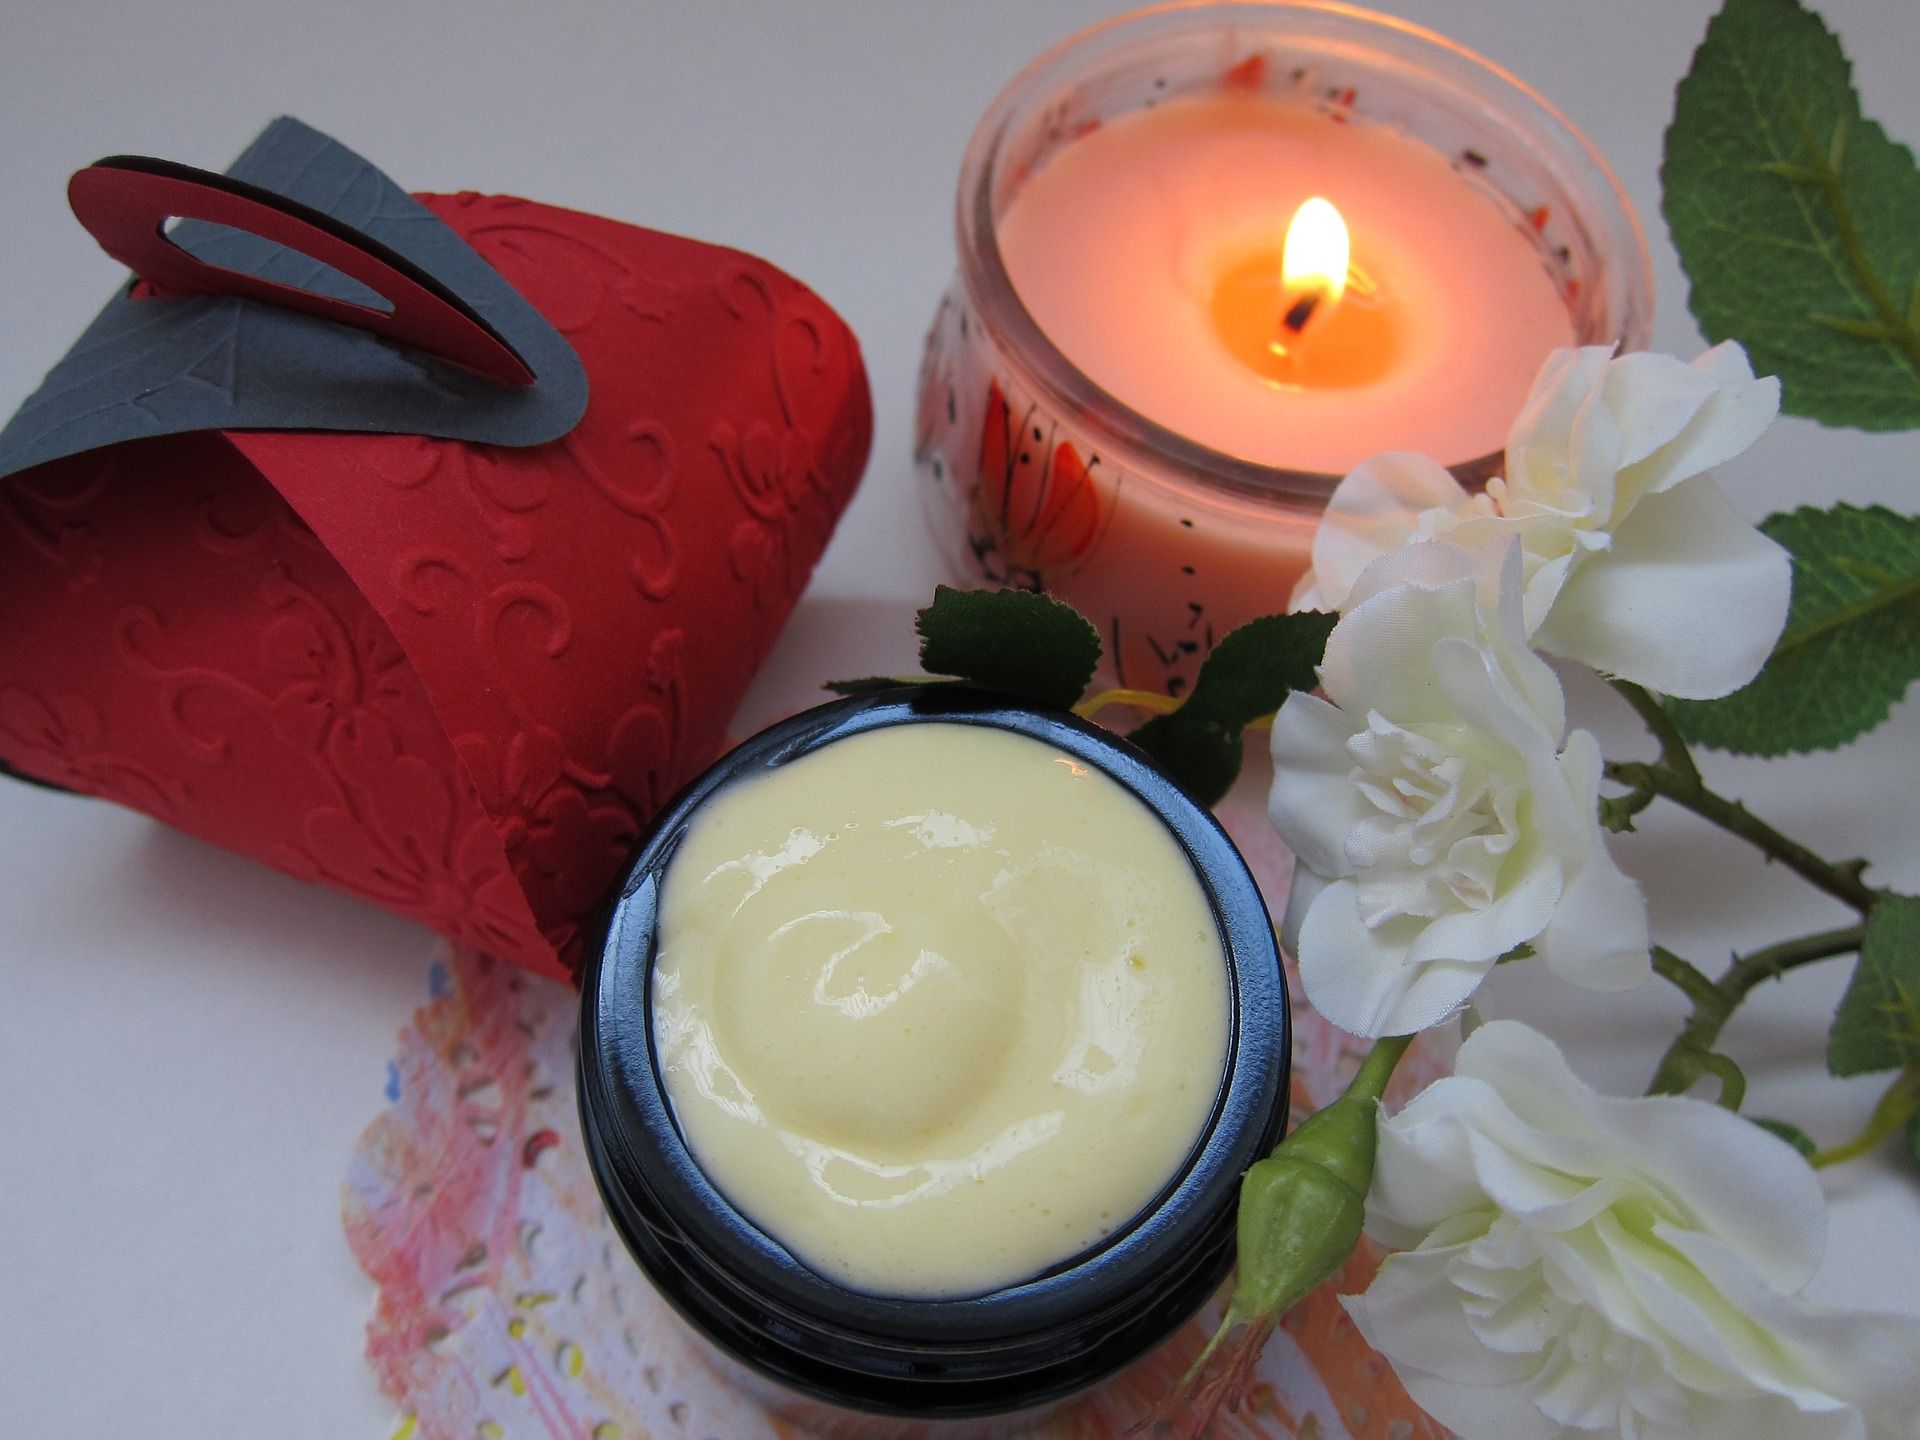 How to Use Body Butter